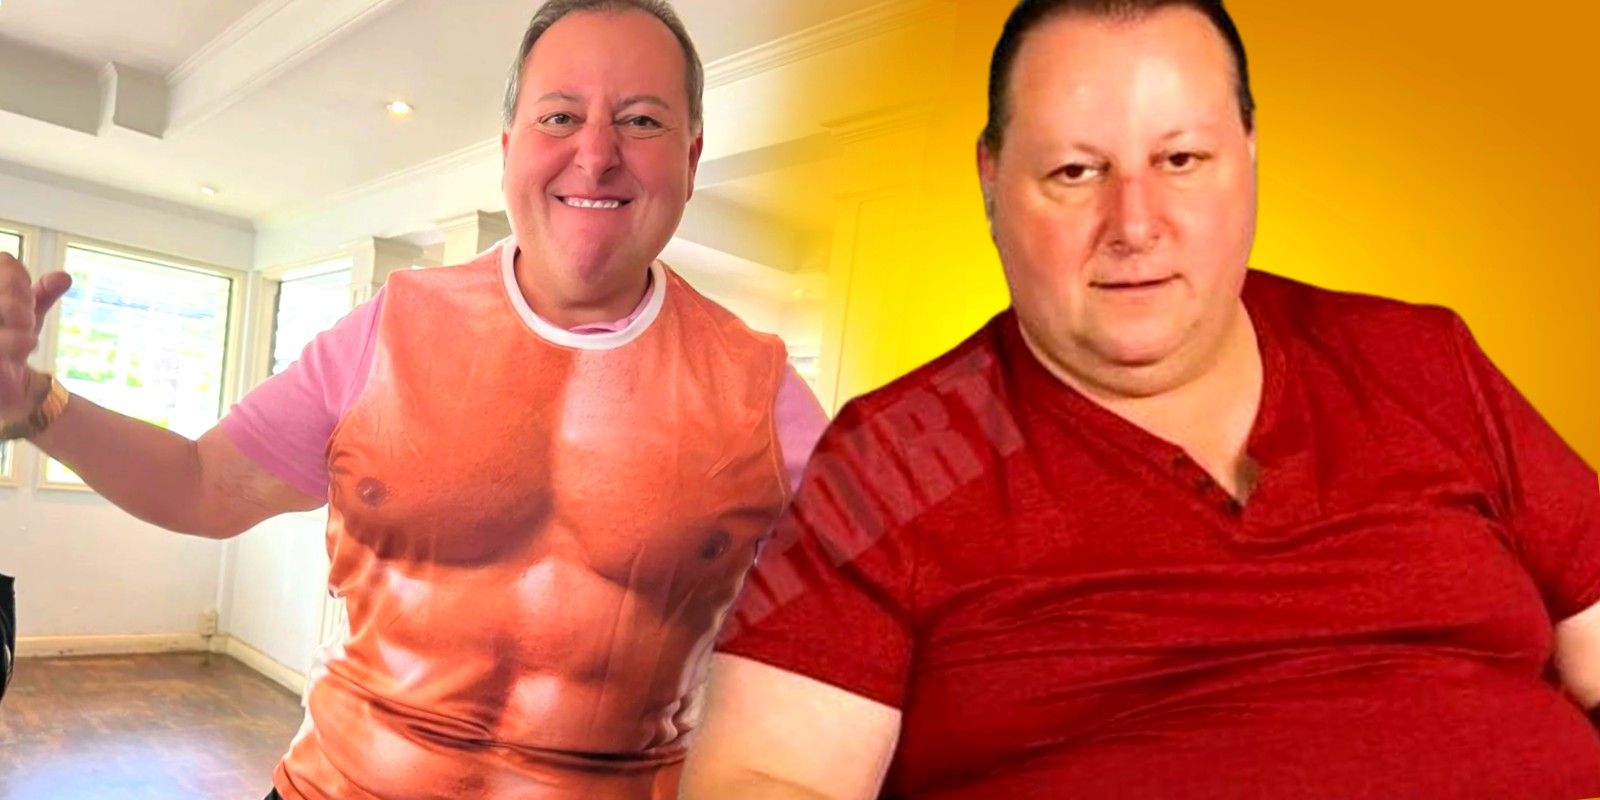 David Toborowsky from 90 Day Fiance shows weight loss